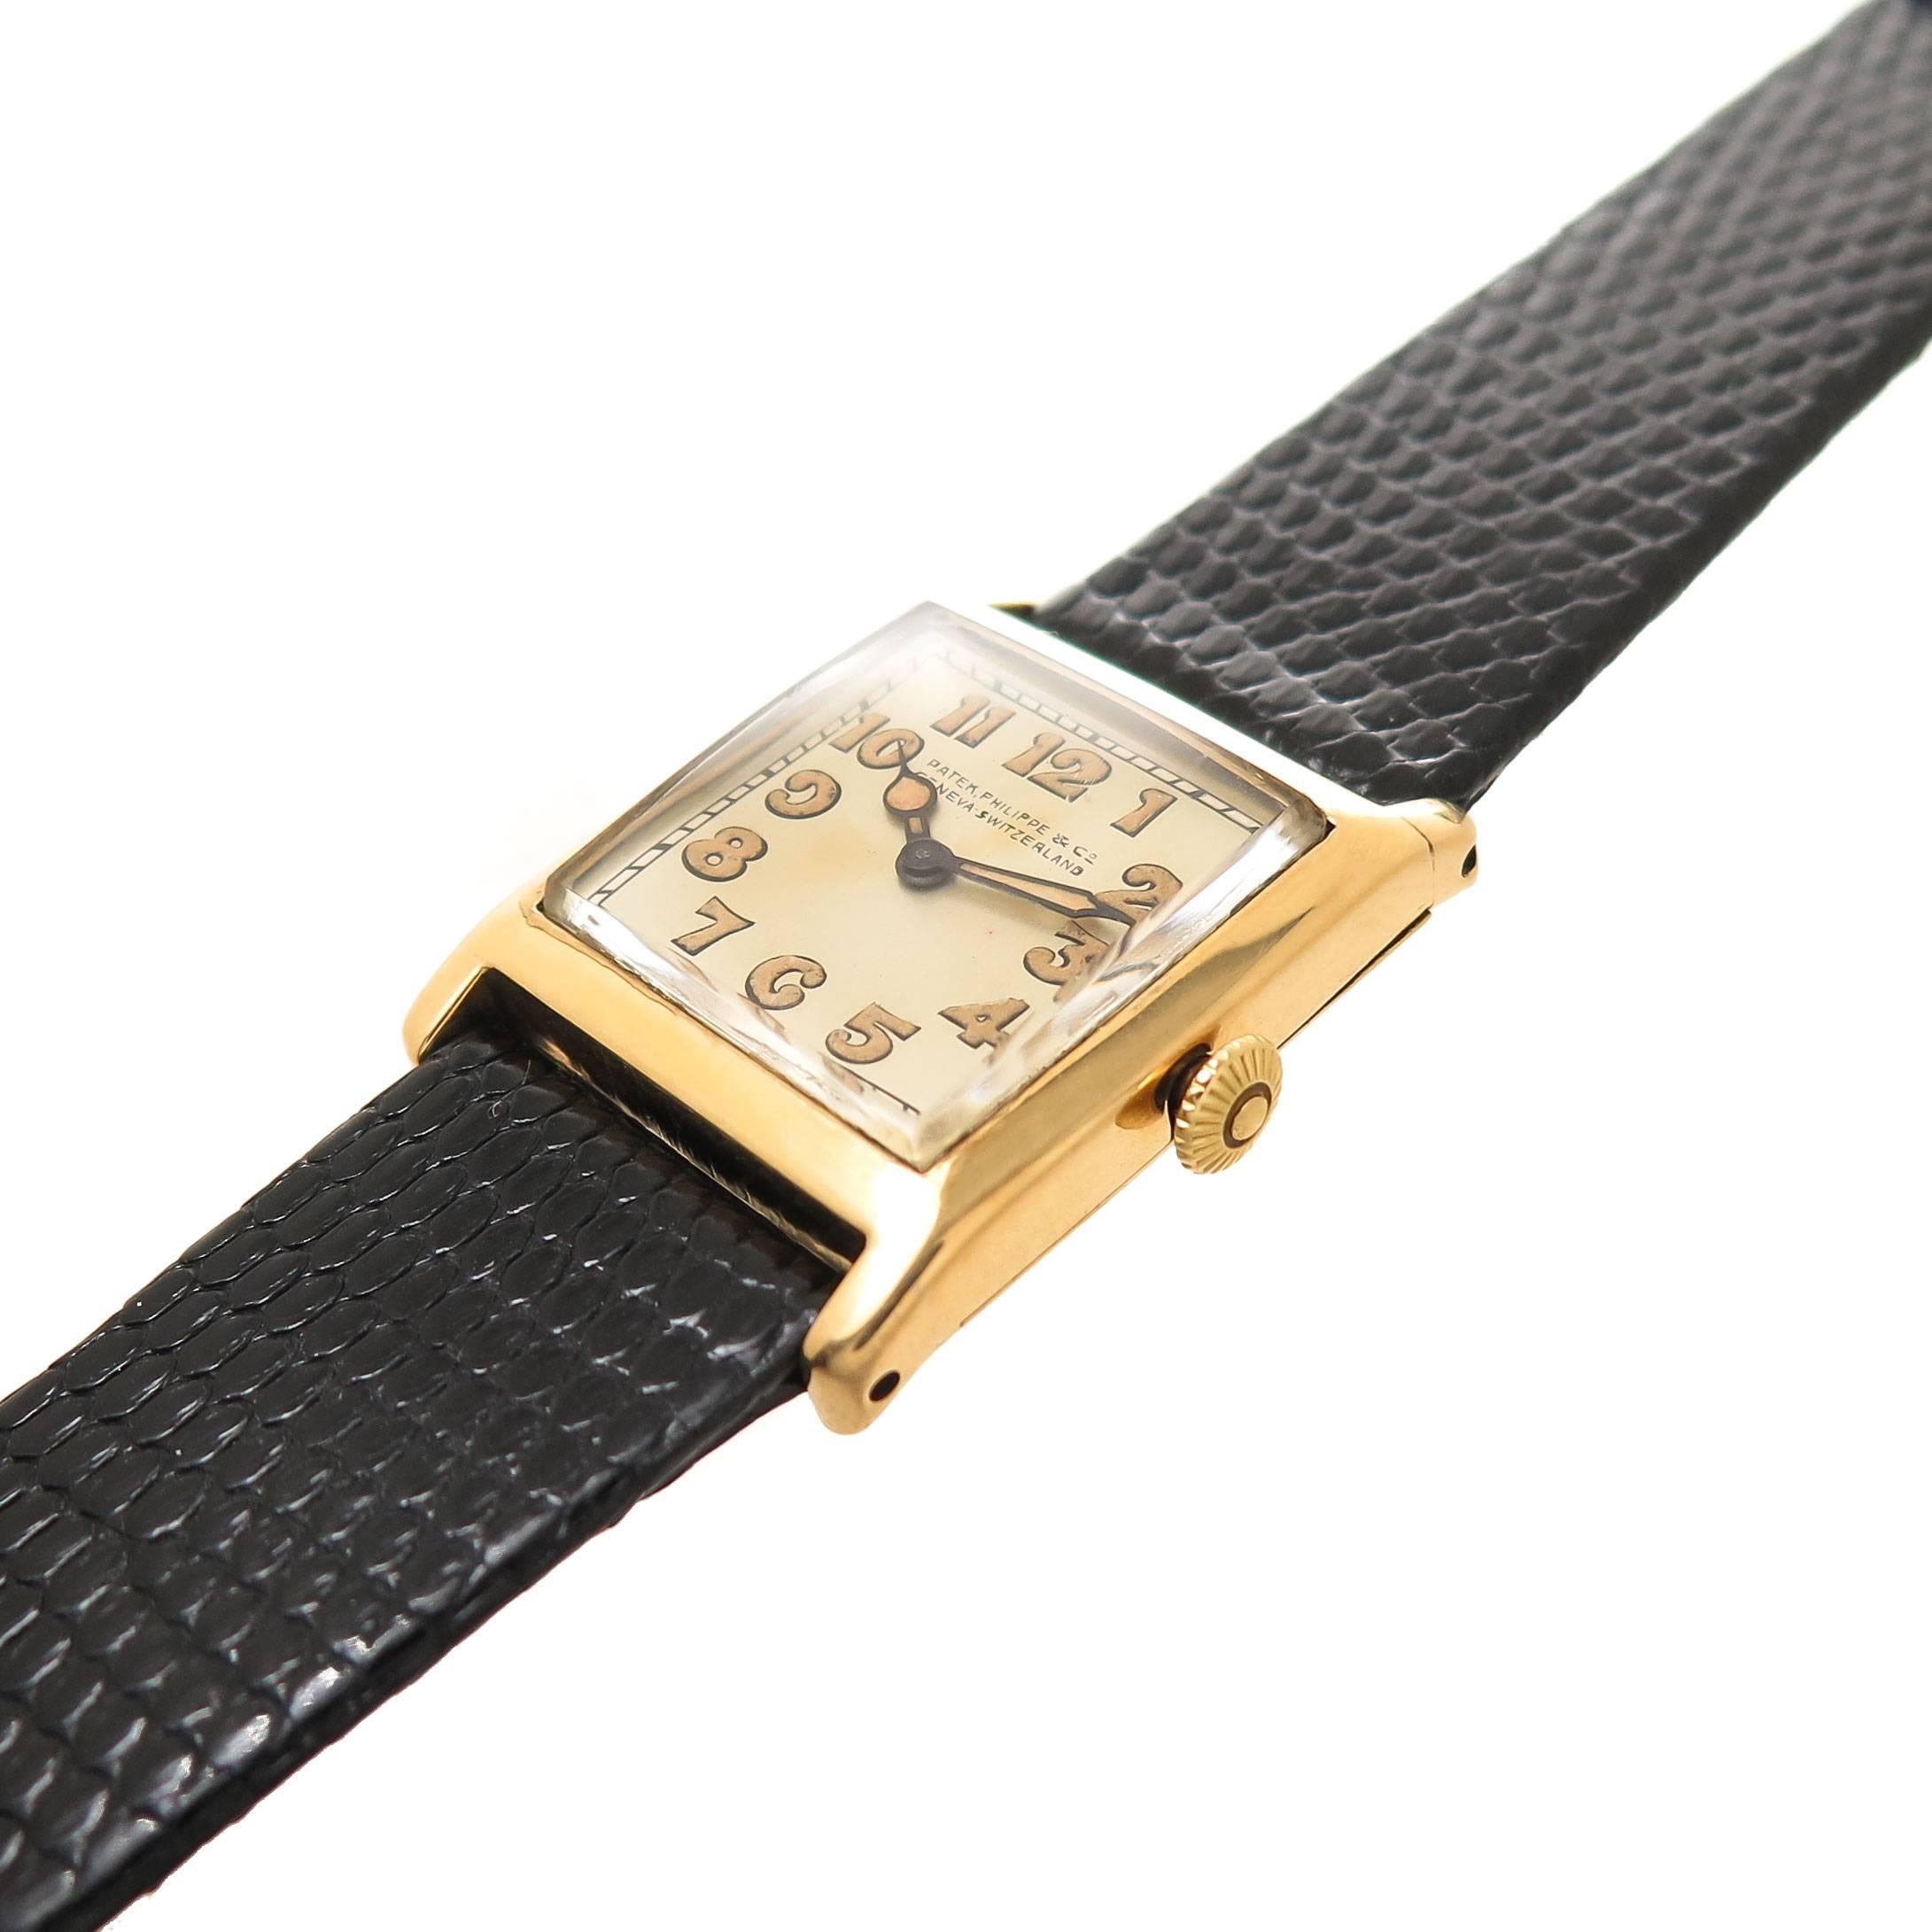 Circa 1920s Patek Philippe Wrist watch, 33 X 25 MM 18K yellow Gold Case, 5 MM in thickness. 18 Jewel Manual wind, mechanical movement.  Original silvered Dial with Luminous Markers. New Black Lizard Strap, total watch length 8 3/4 inch.